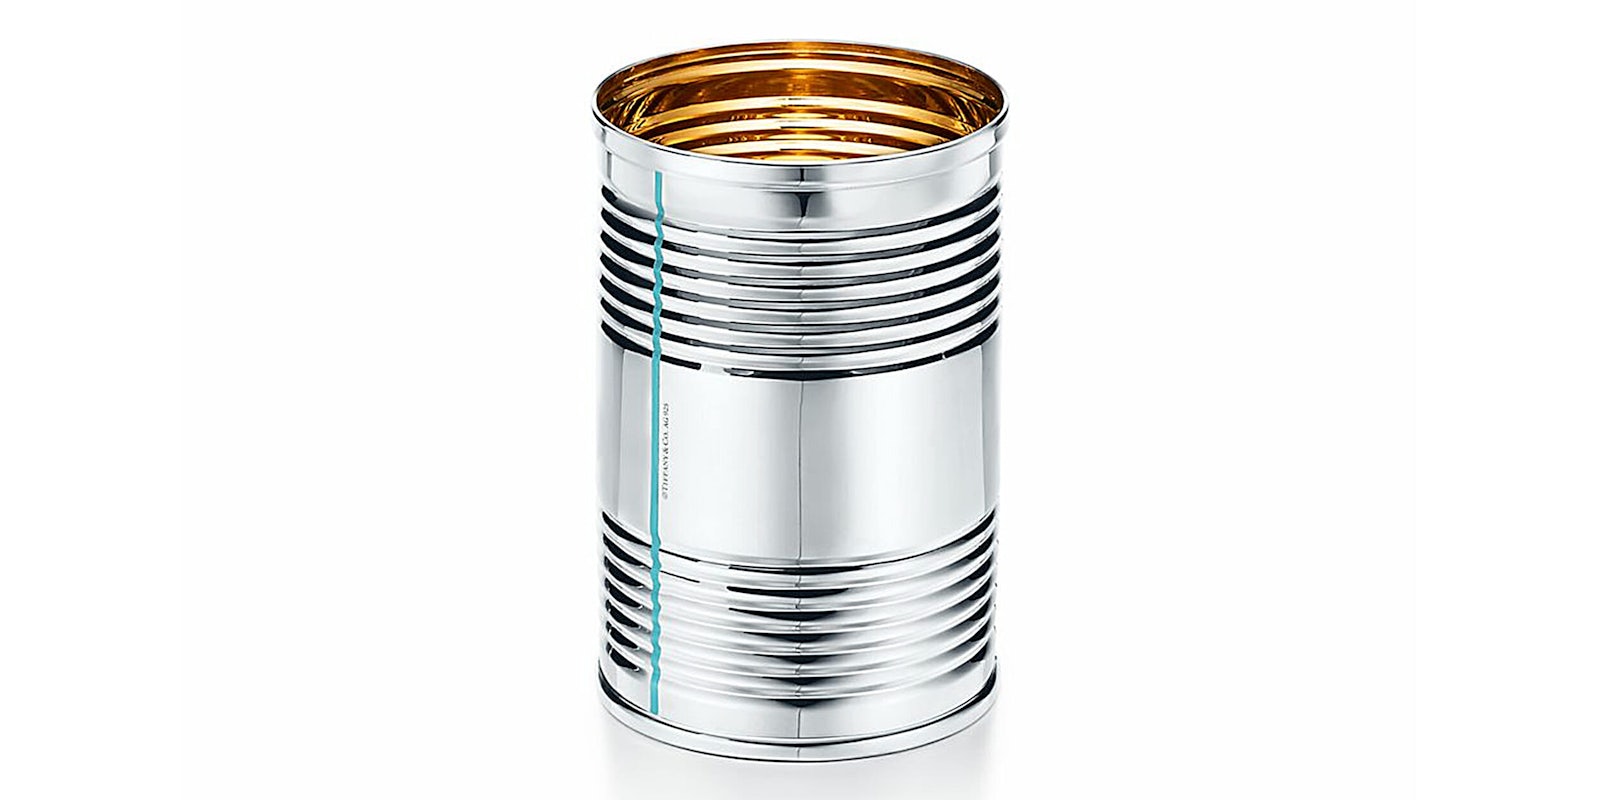 $1000 tin can from Tiffany & Co everyday objects line